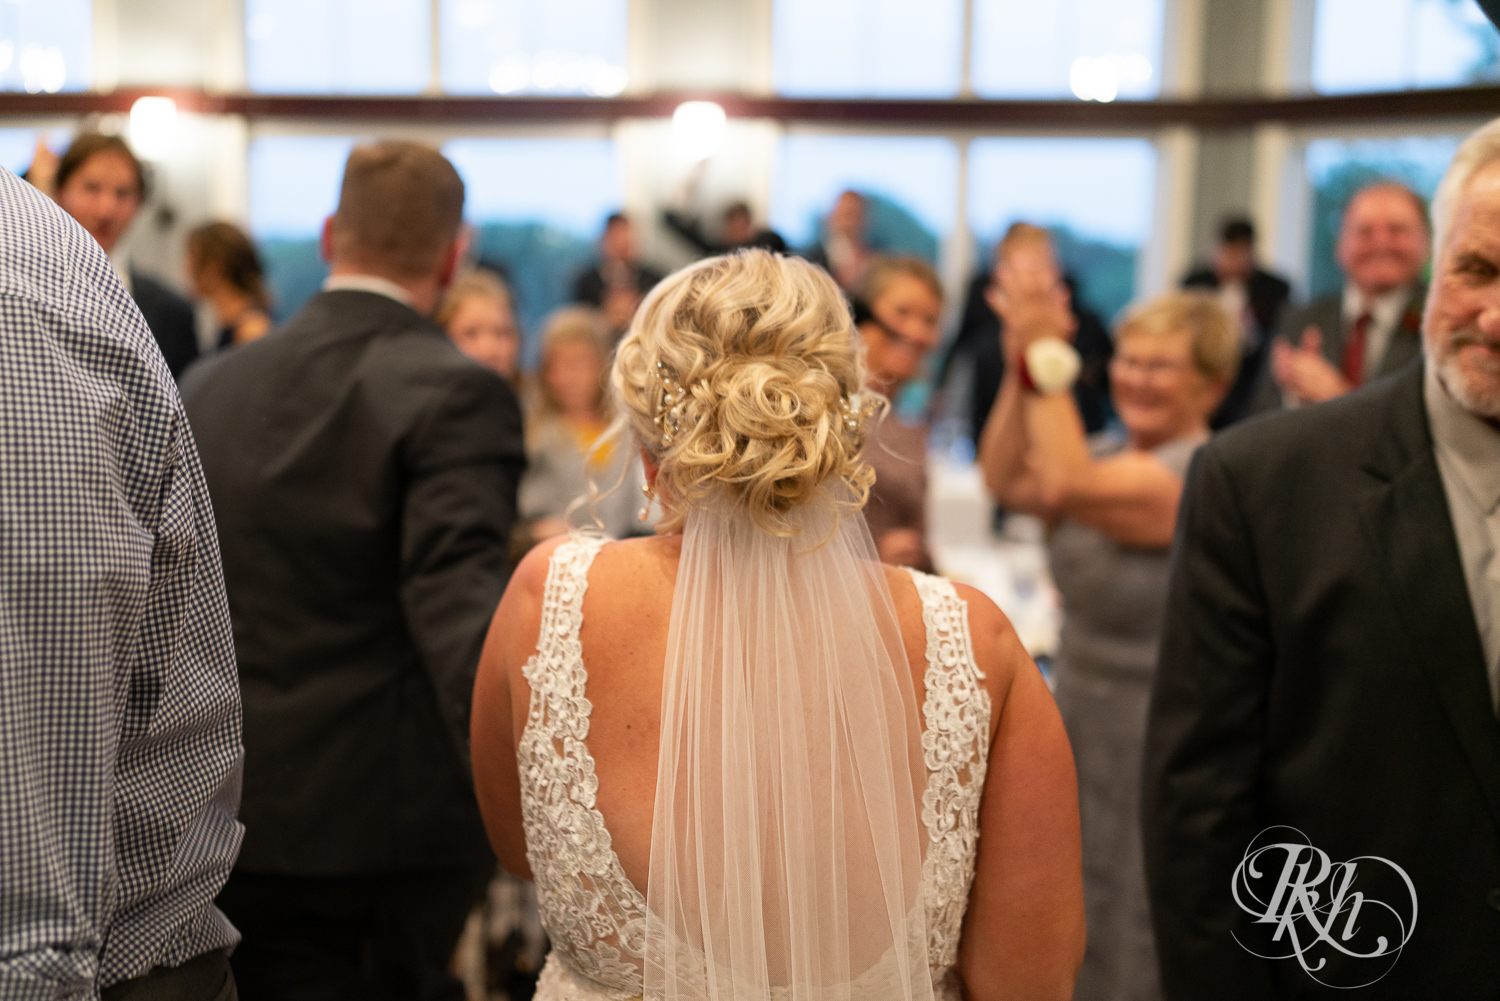 Bride and groom enter reception at Hastings Golf Club in Hastings, Minnesota.